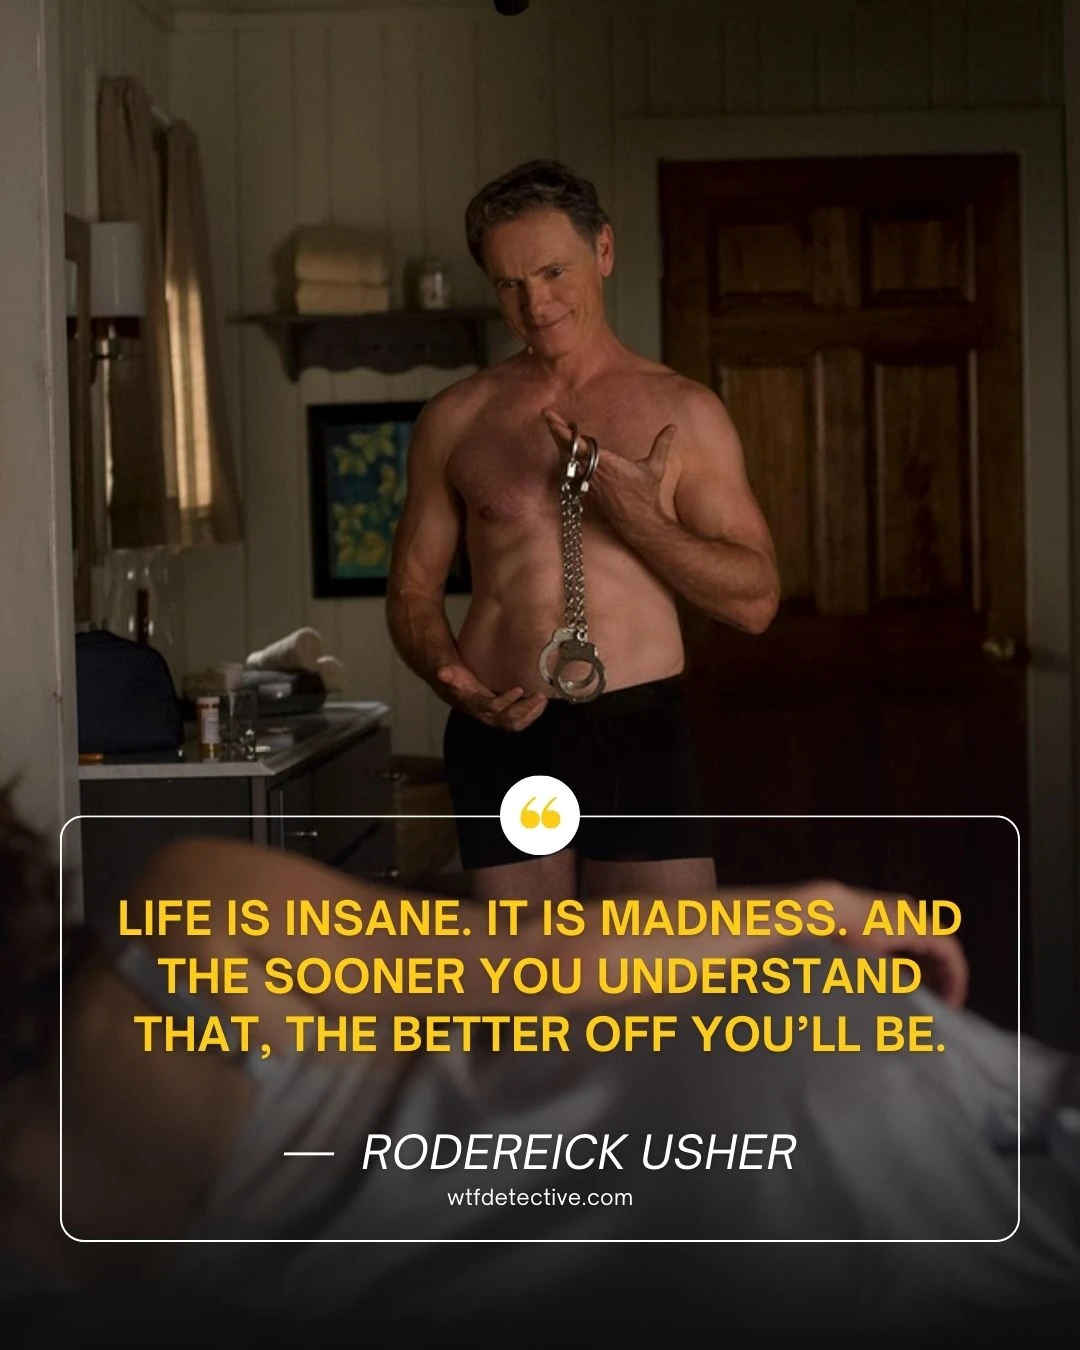 Life is insane. It is madness. And the sooner you understand that, the better off you’ll be.

roderick usher quotes, bruce greenwood from the fall of usher sayings